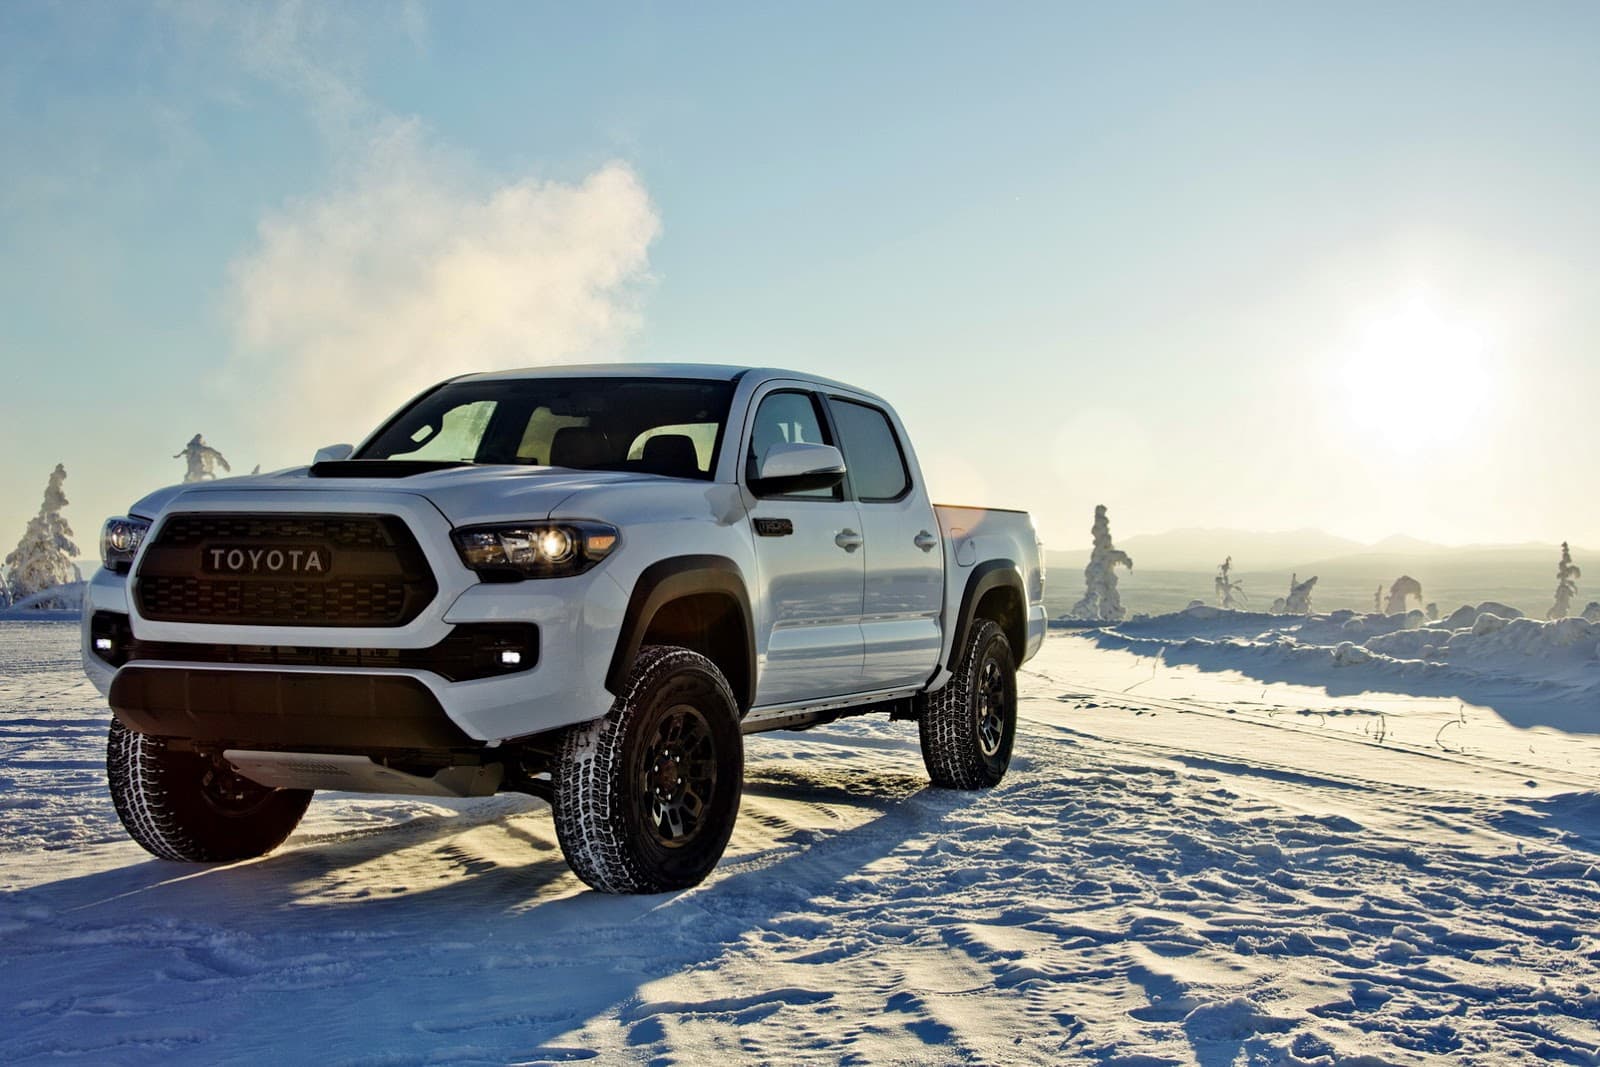 Toyota Tacoma 2016 wallpaper HD High Resolution Download